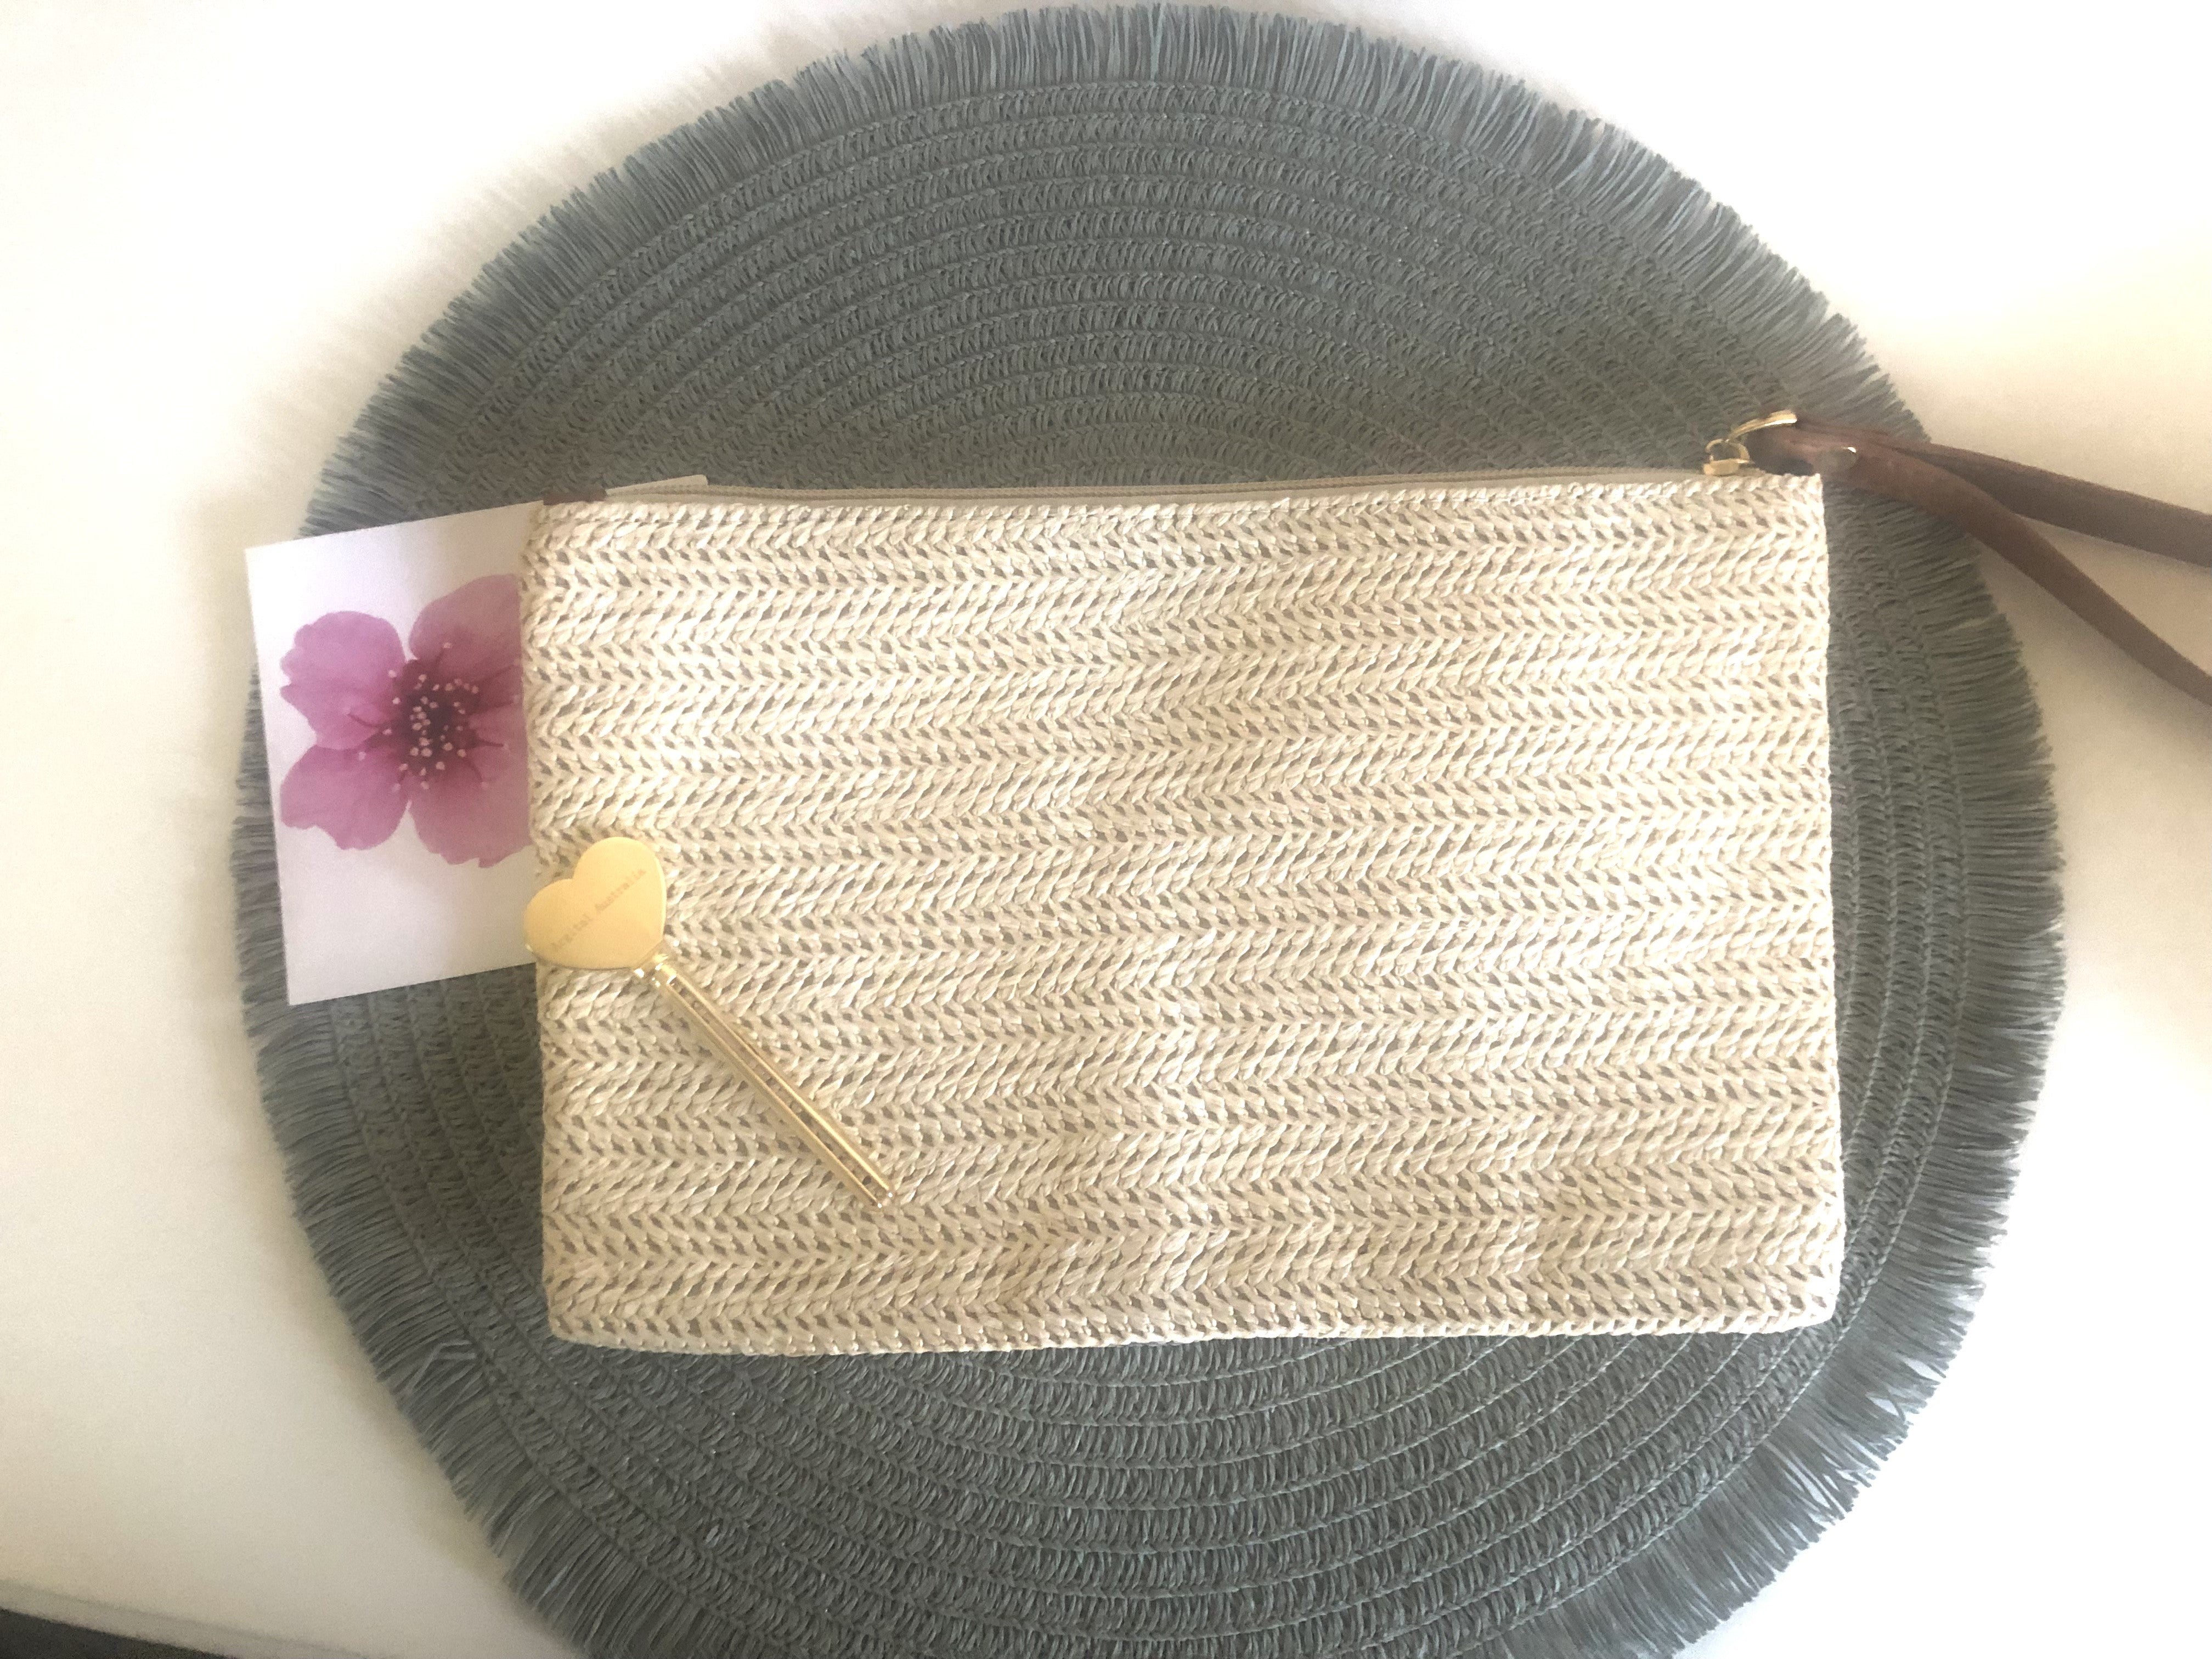 Straw Woven Cosmetic Bag with Wrist band